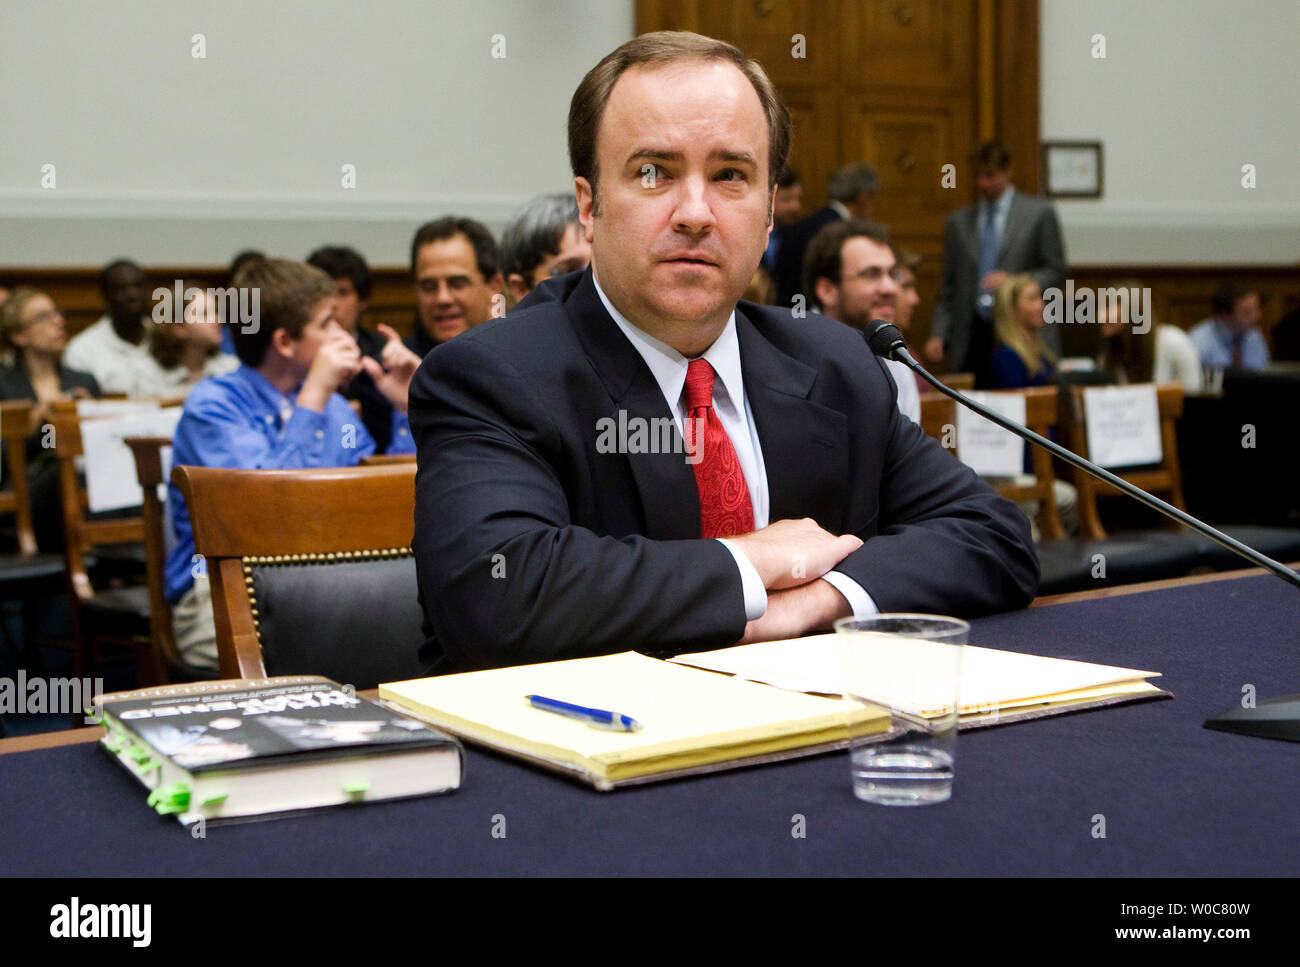 Former White House Press Secretary Scott McClellan testifies during a House Judiciary Committee hearing on revelations brought forth in his book 'What Happened: Inside the Bush White House and Washington's Culture of Deception' and specifically focusing on reported attempts to cover up the involvement of White House officials in the leak of the covert identity of CIA officer Valerie Plame Wilson on Capitol Hill in Washington on June 20, 2008. (UPI Photo/Patrick D. McDermott) Stock Photo